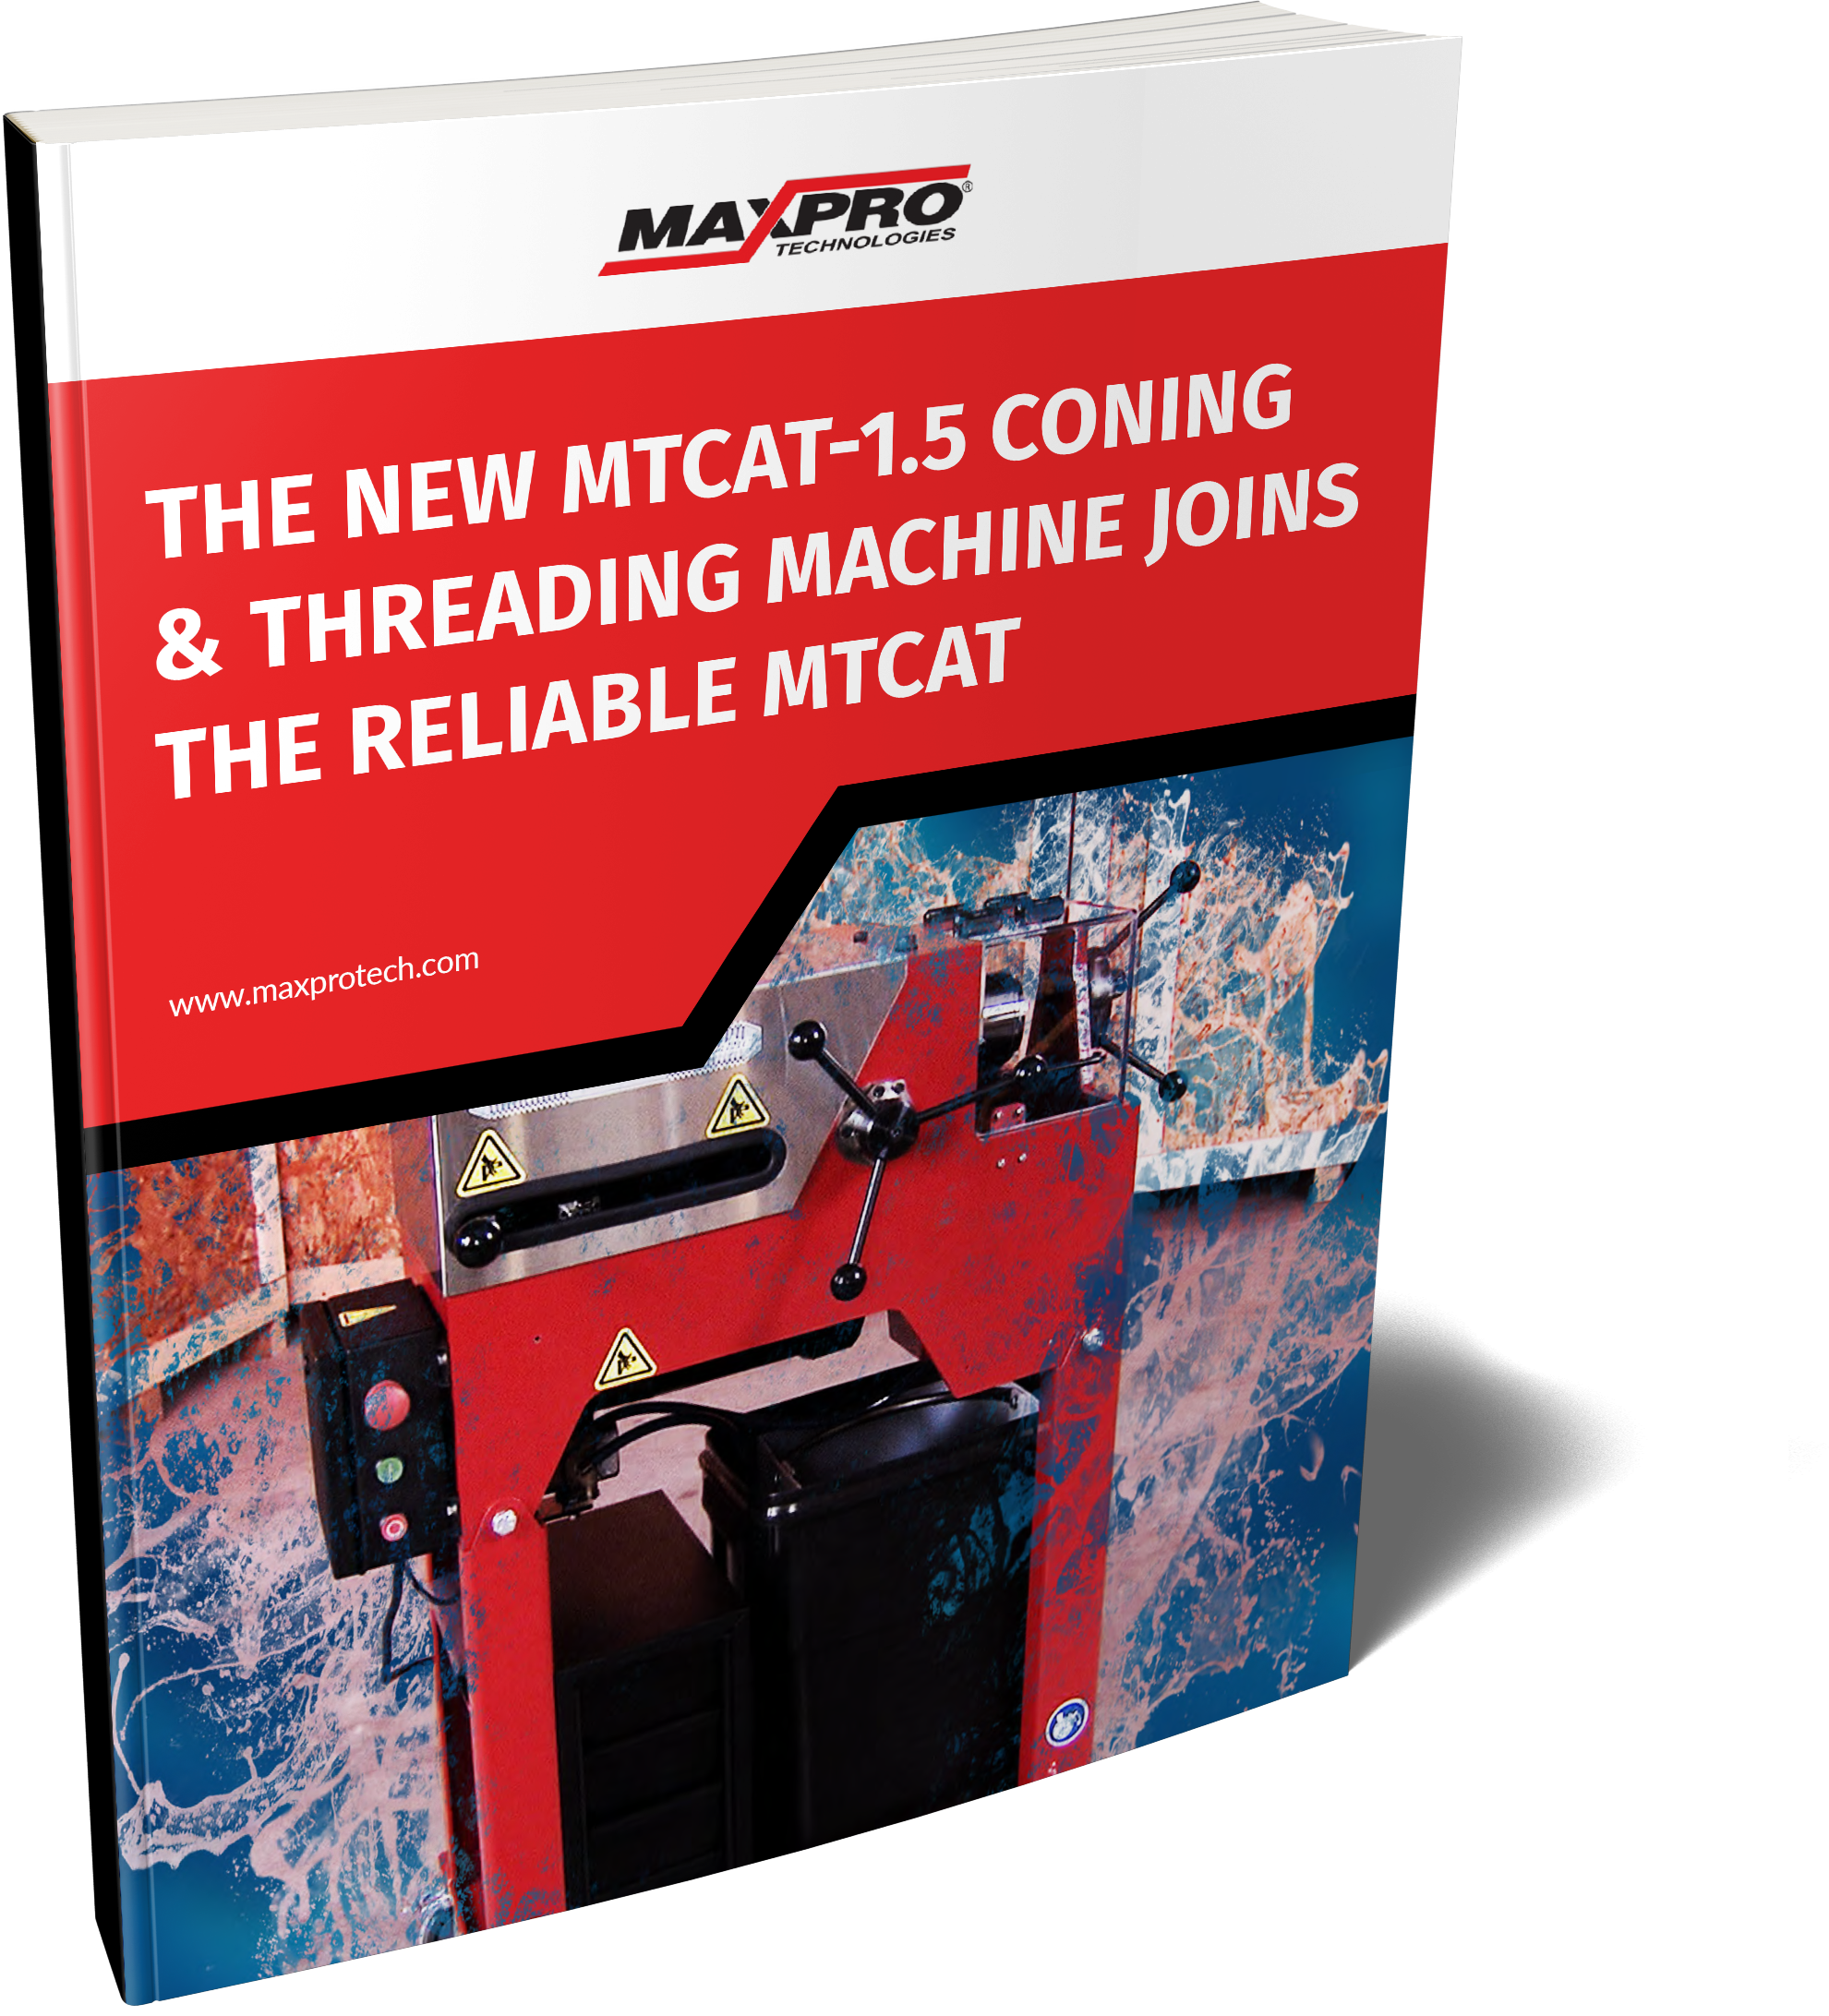 The New Mtcat-1.5 Coning & Threading Machine Joins The Reliable Mtcat